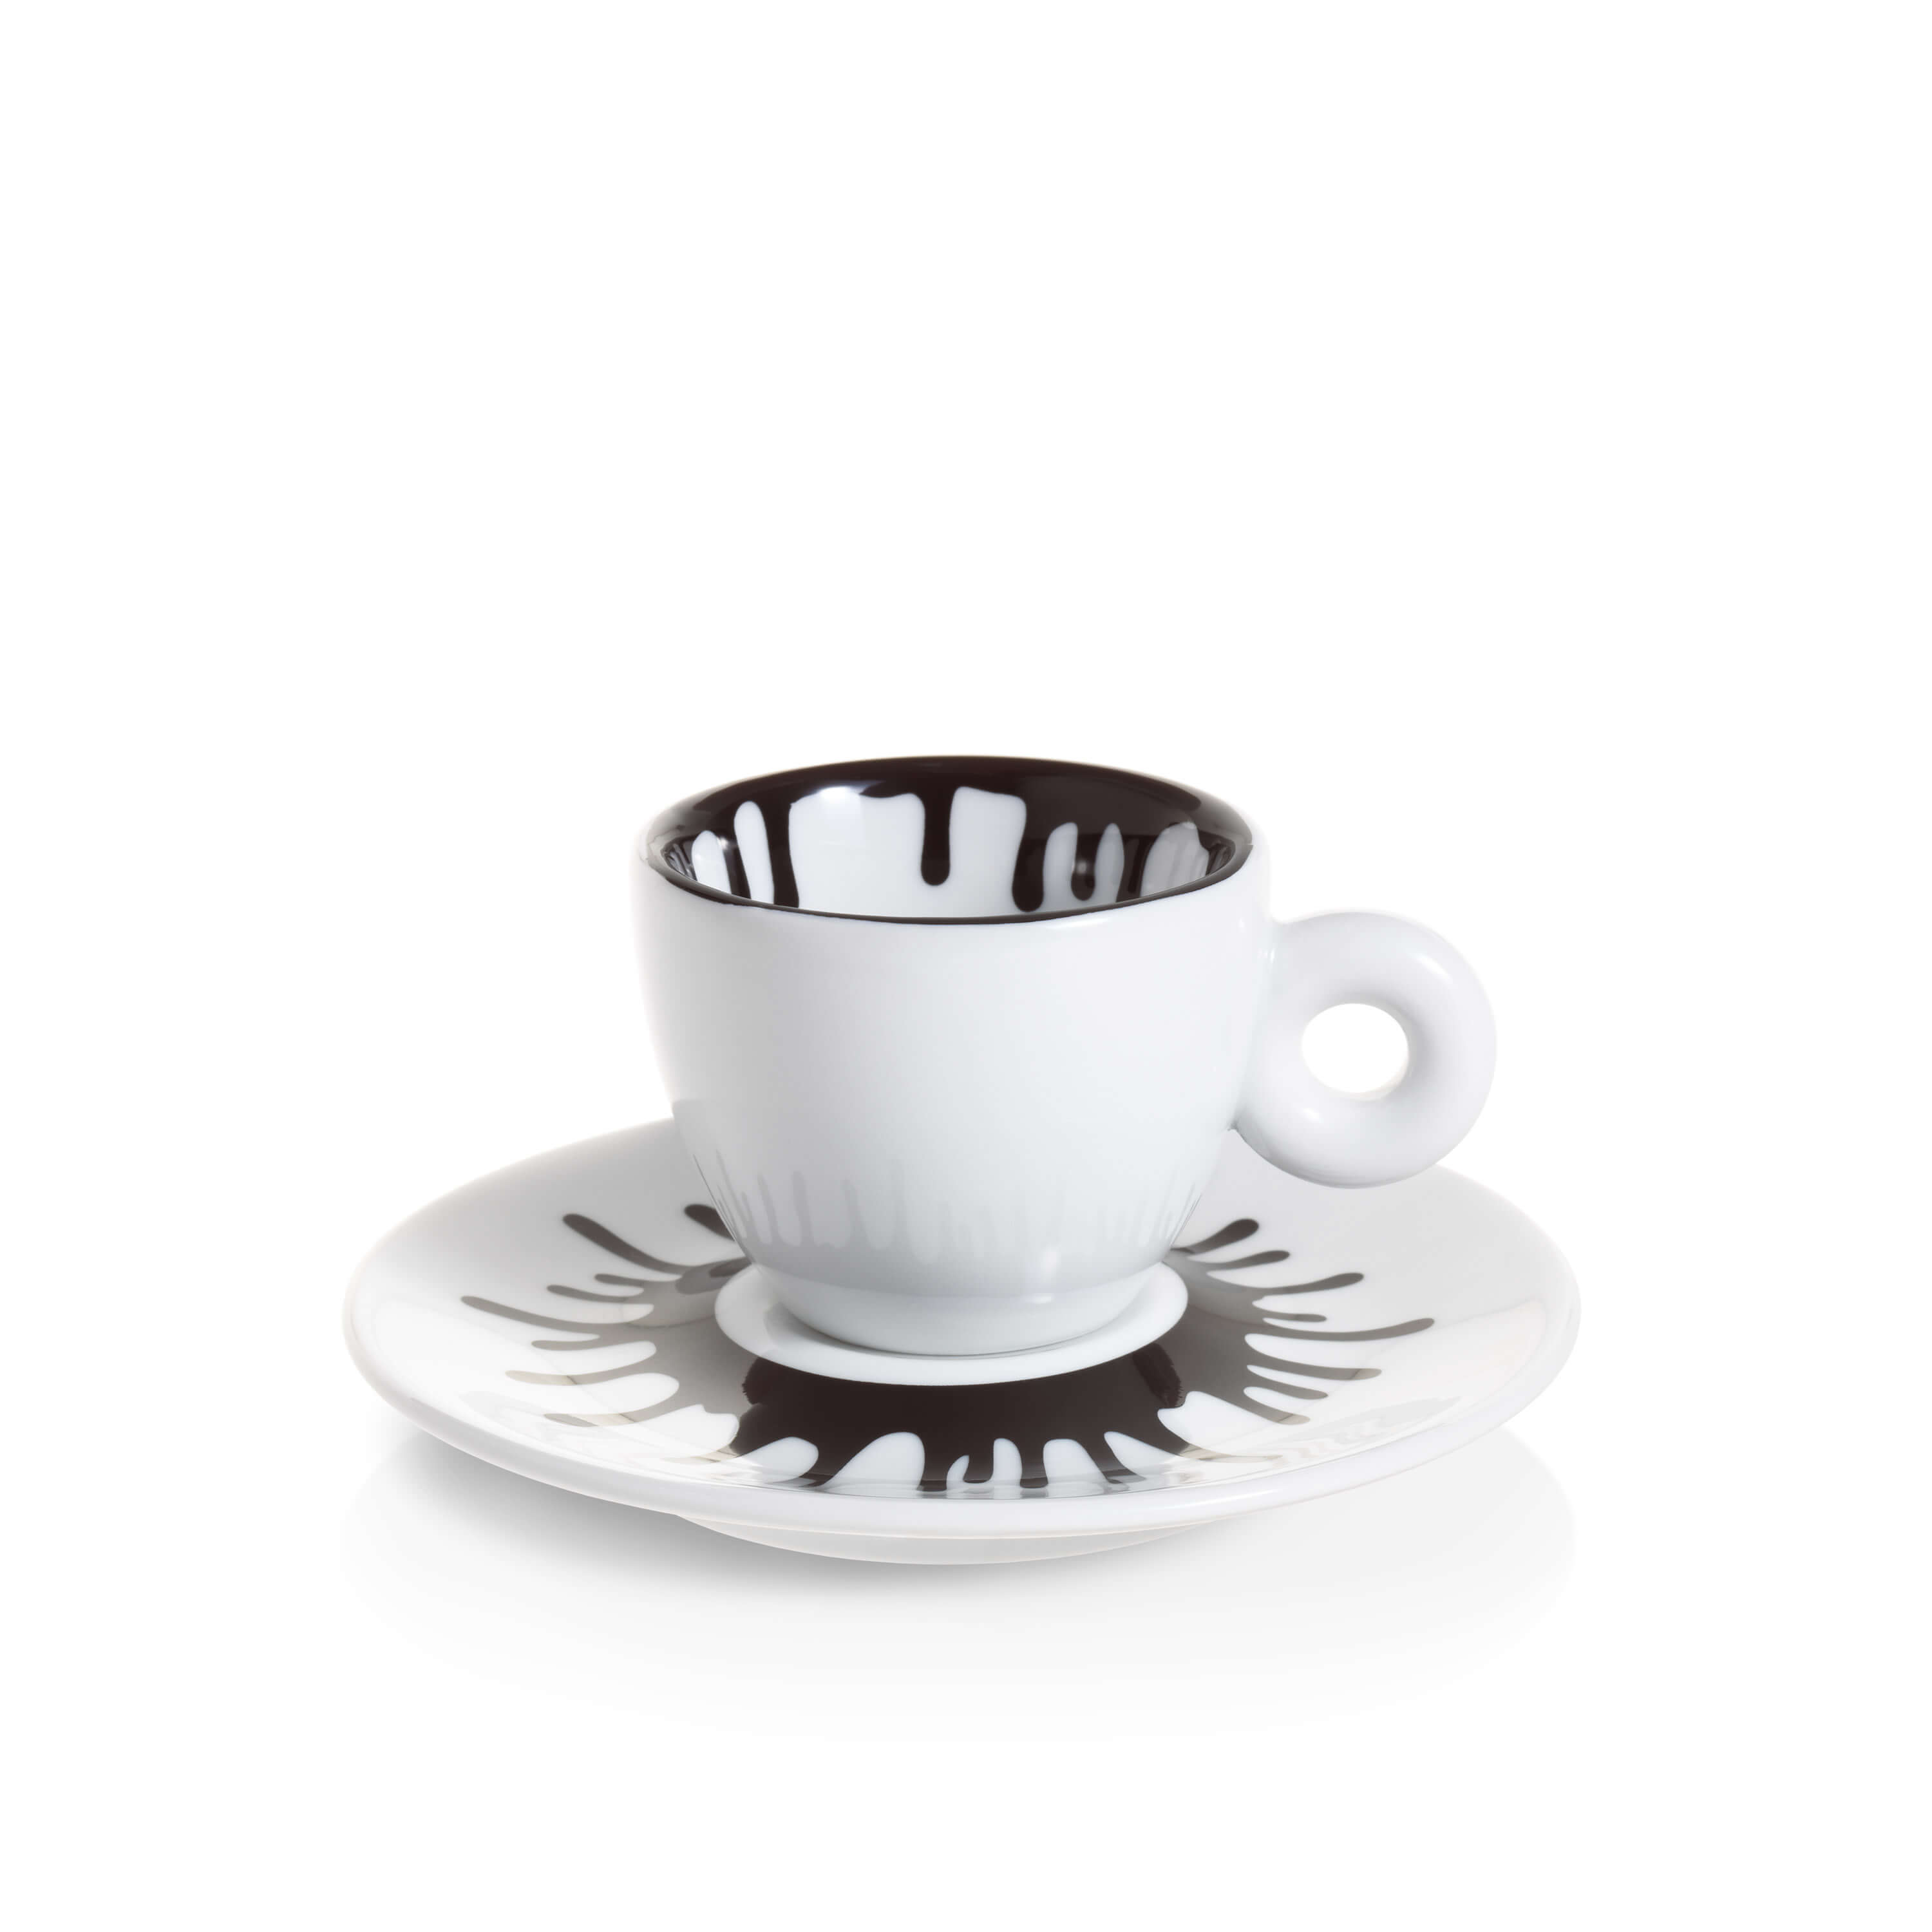 illy Art Collection ΑΙ WEIWEI Gift Set 4 Espresso Cups, Cups, 02-02-6072